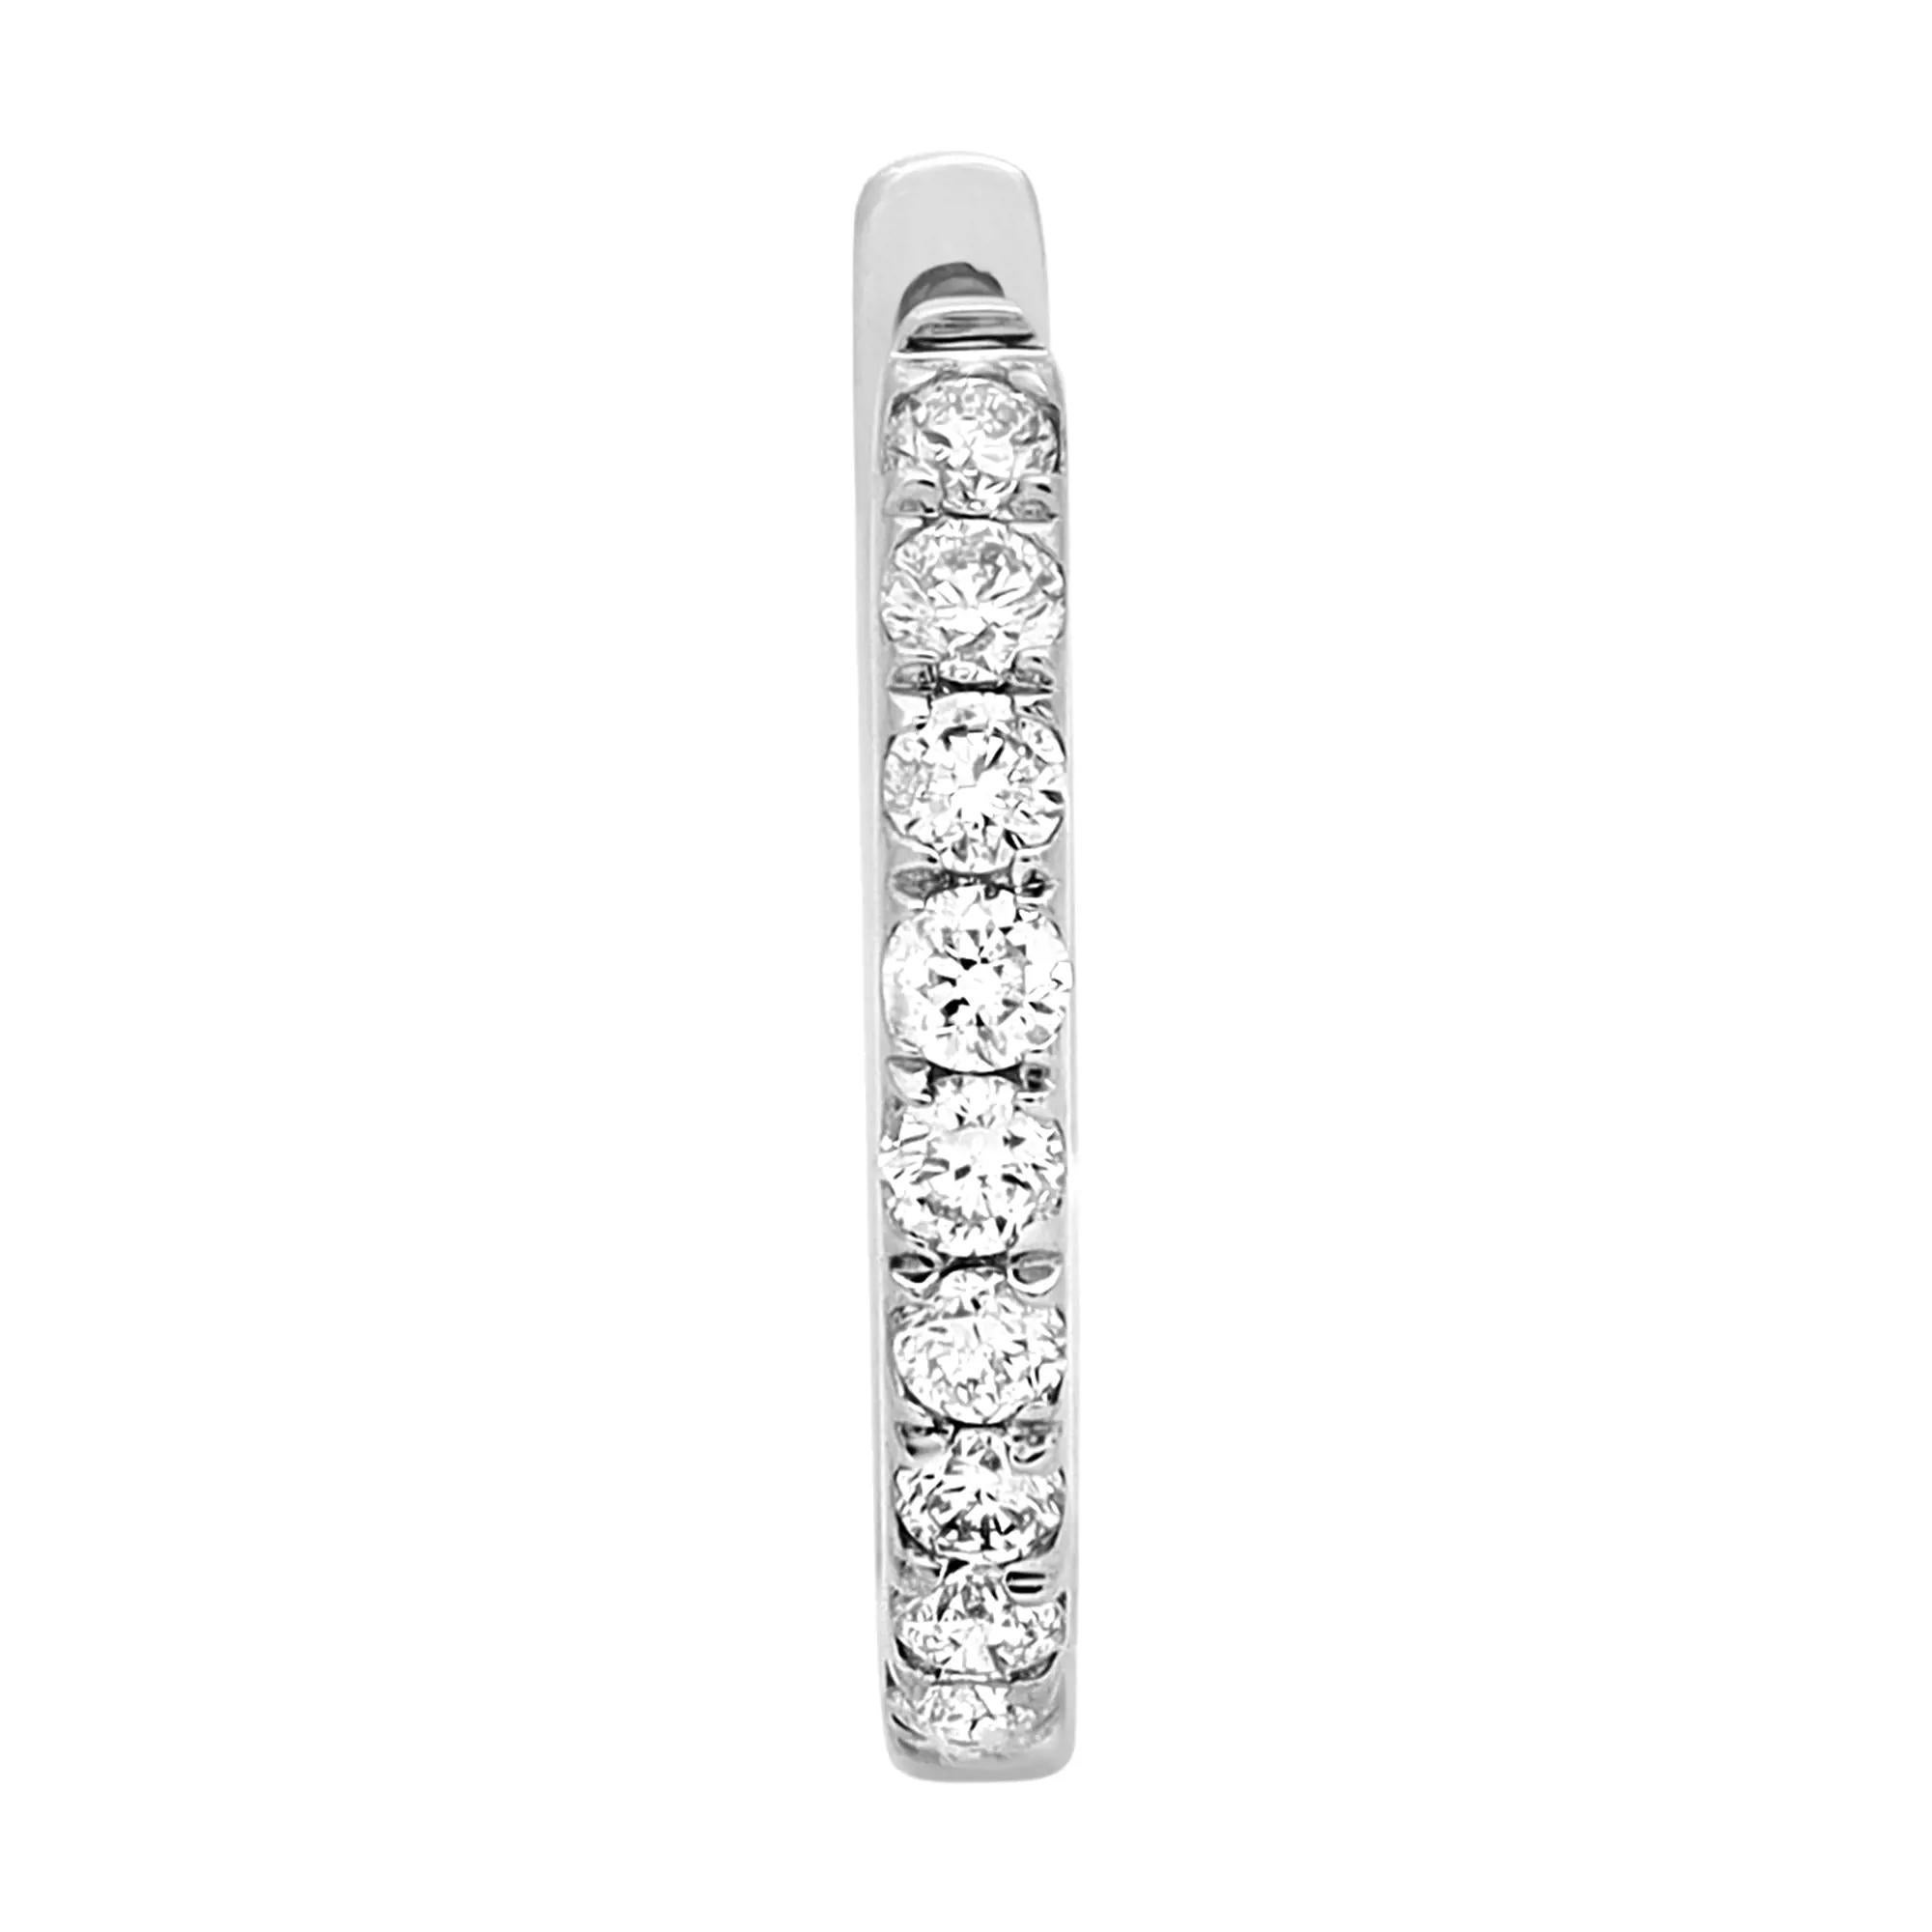 Sleek and classic, these timeless diamond huggie earrings are perfect for a great everyday look. Featuring a row of prong set bright white round cut diamonds set in lustrous 14K white gold. Total diamond weight: 0.20 carat. Diamond quality: Color